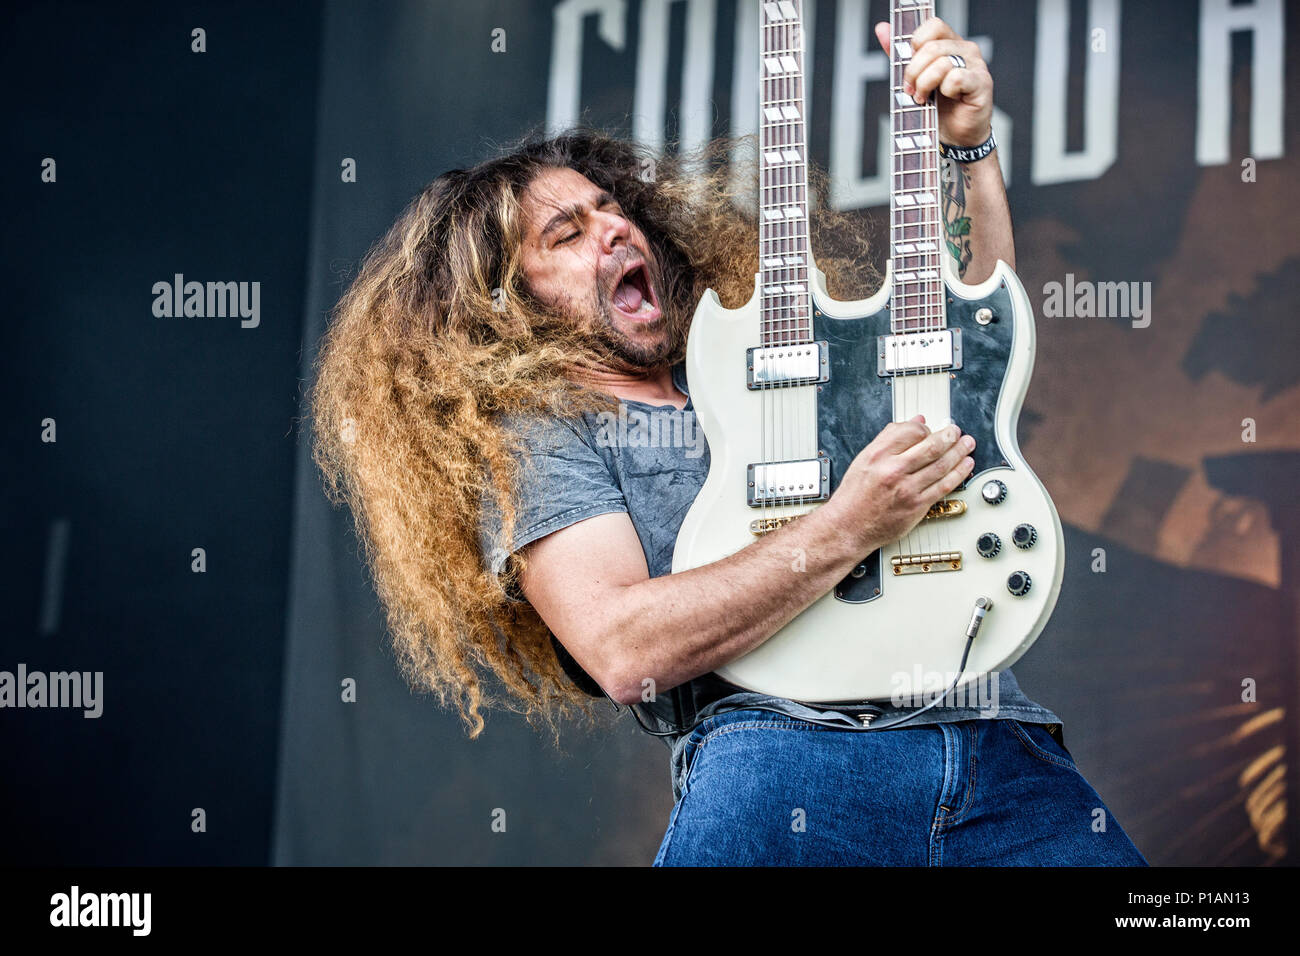 Sweden, Solvesborg - June 08, 2017. Coheed and Cambria, the American progressive rock band, performs a live concert during the Swedish music festival Sweden Rock Festival 2017 in Blekinge. Here guitarist Claudio Sanchez is seen live on stage. (Photo credit: Gonzales Photo - Terje Dokken). Stock Photo